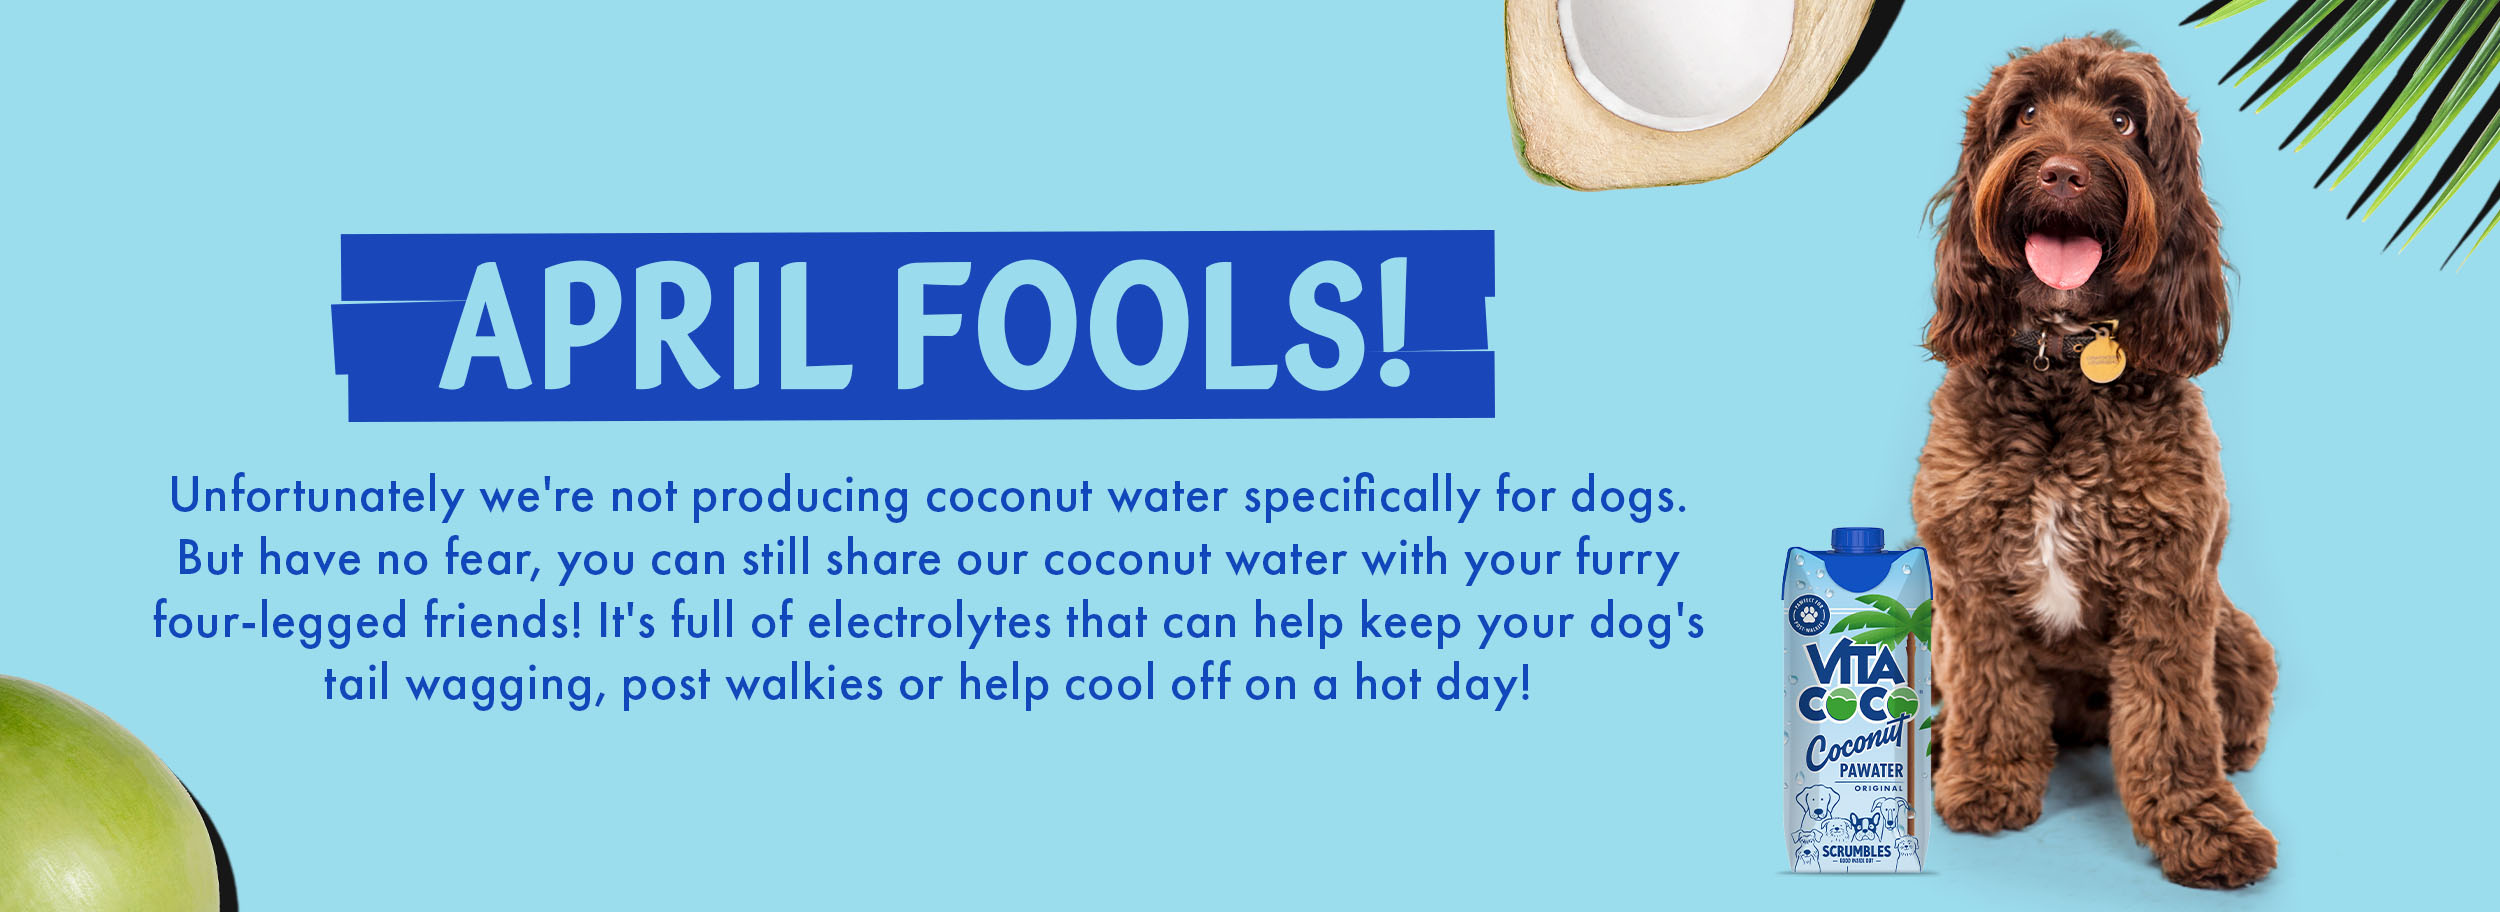 April Fools! - We do not sell coconut water for dogs.